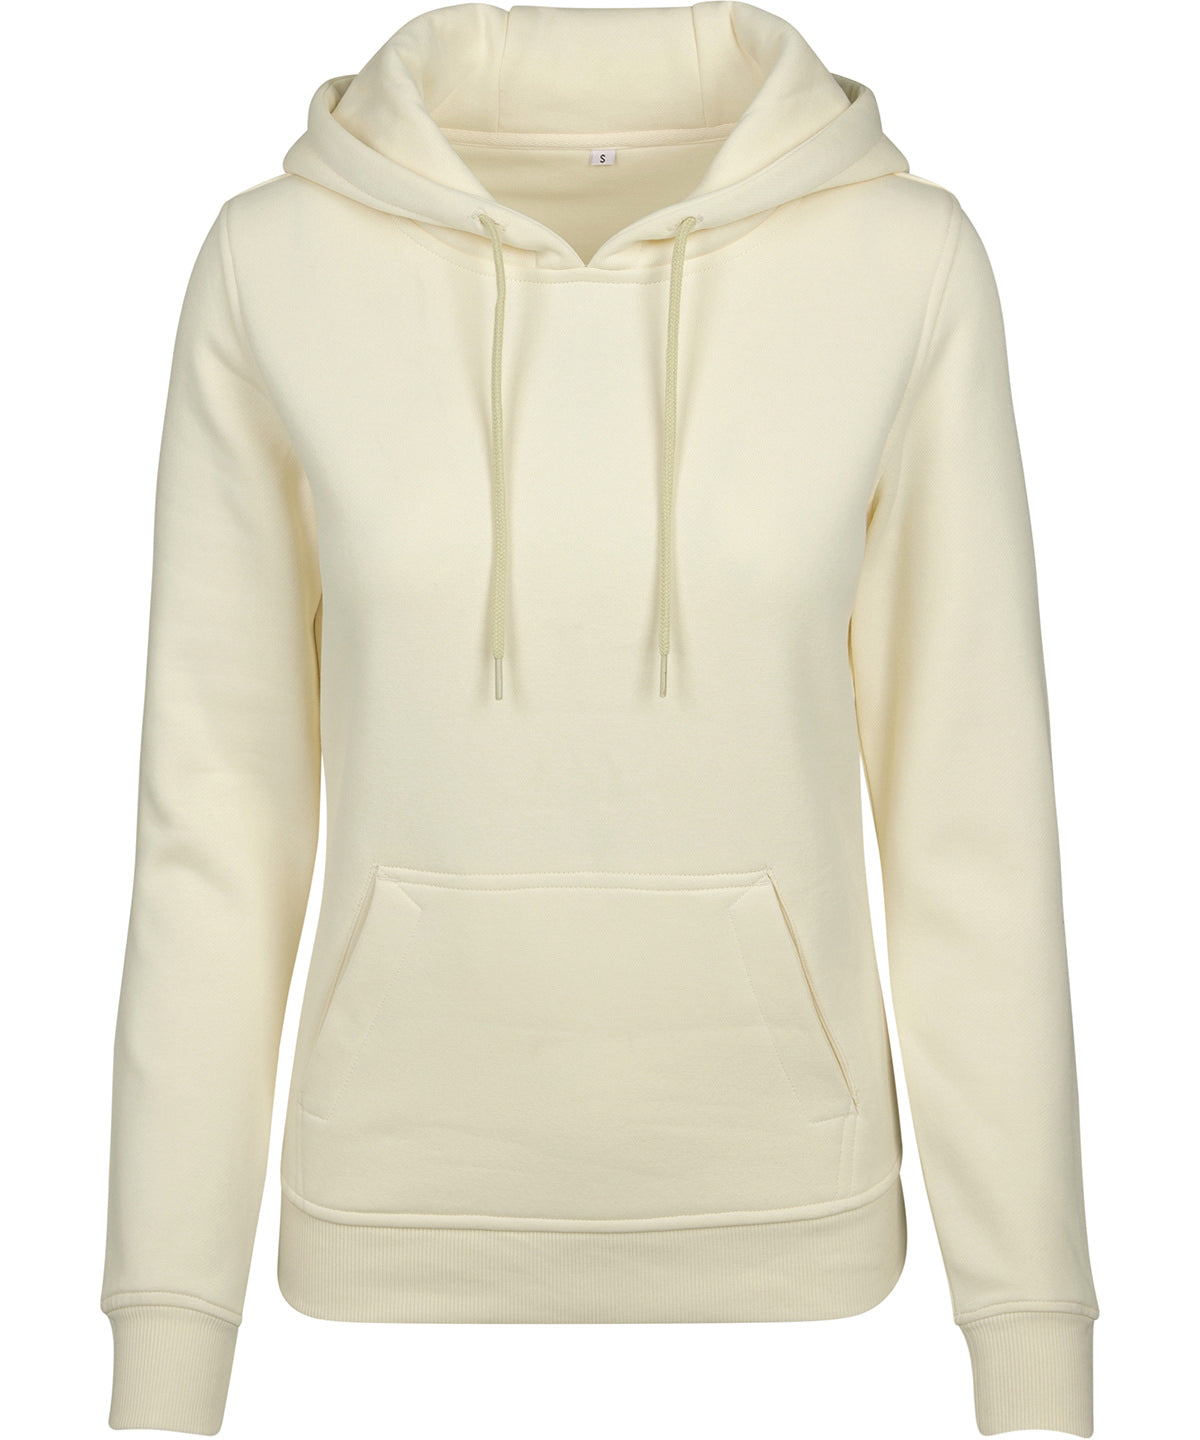 Coozo BY026 Women's heavy hoodie all street style soft cotton - COOZO